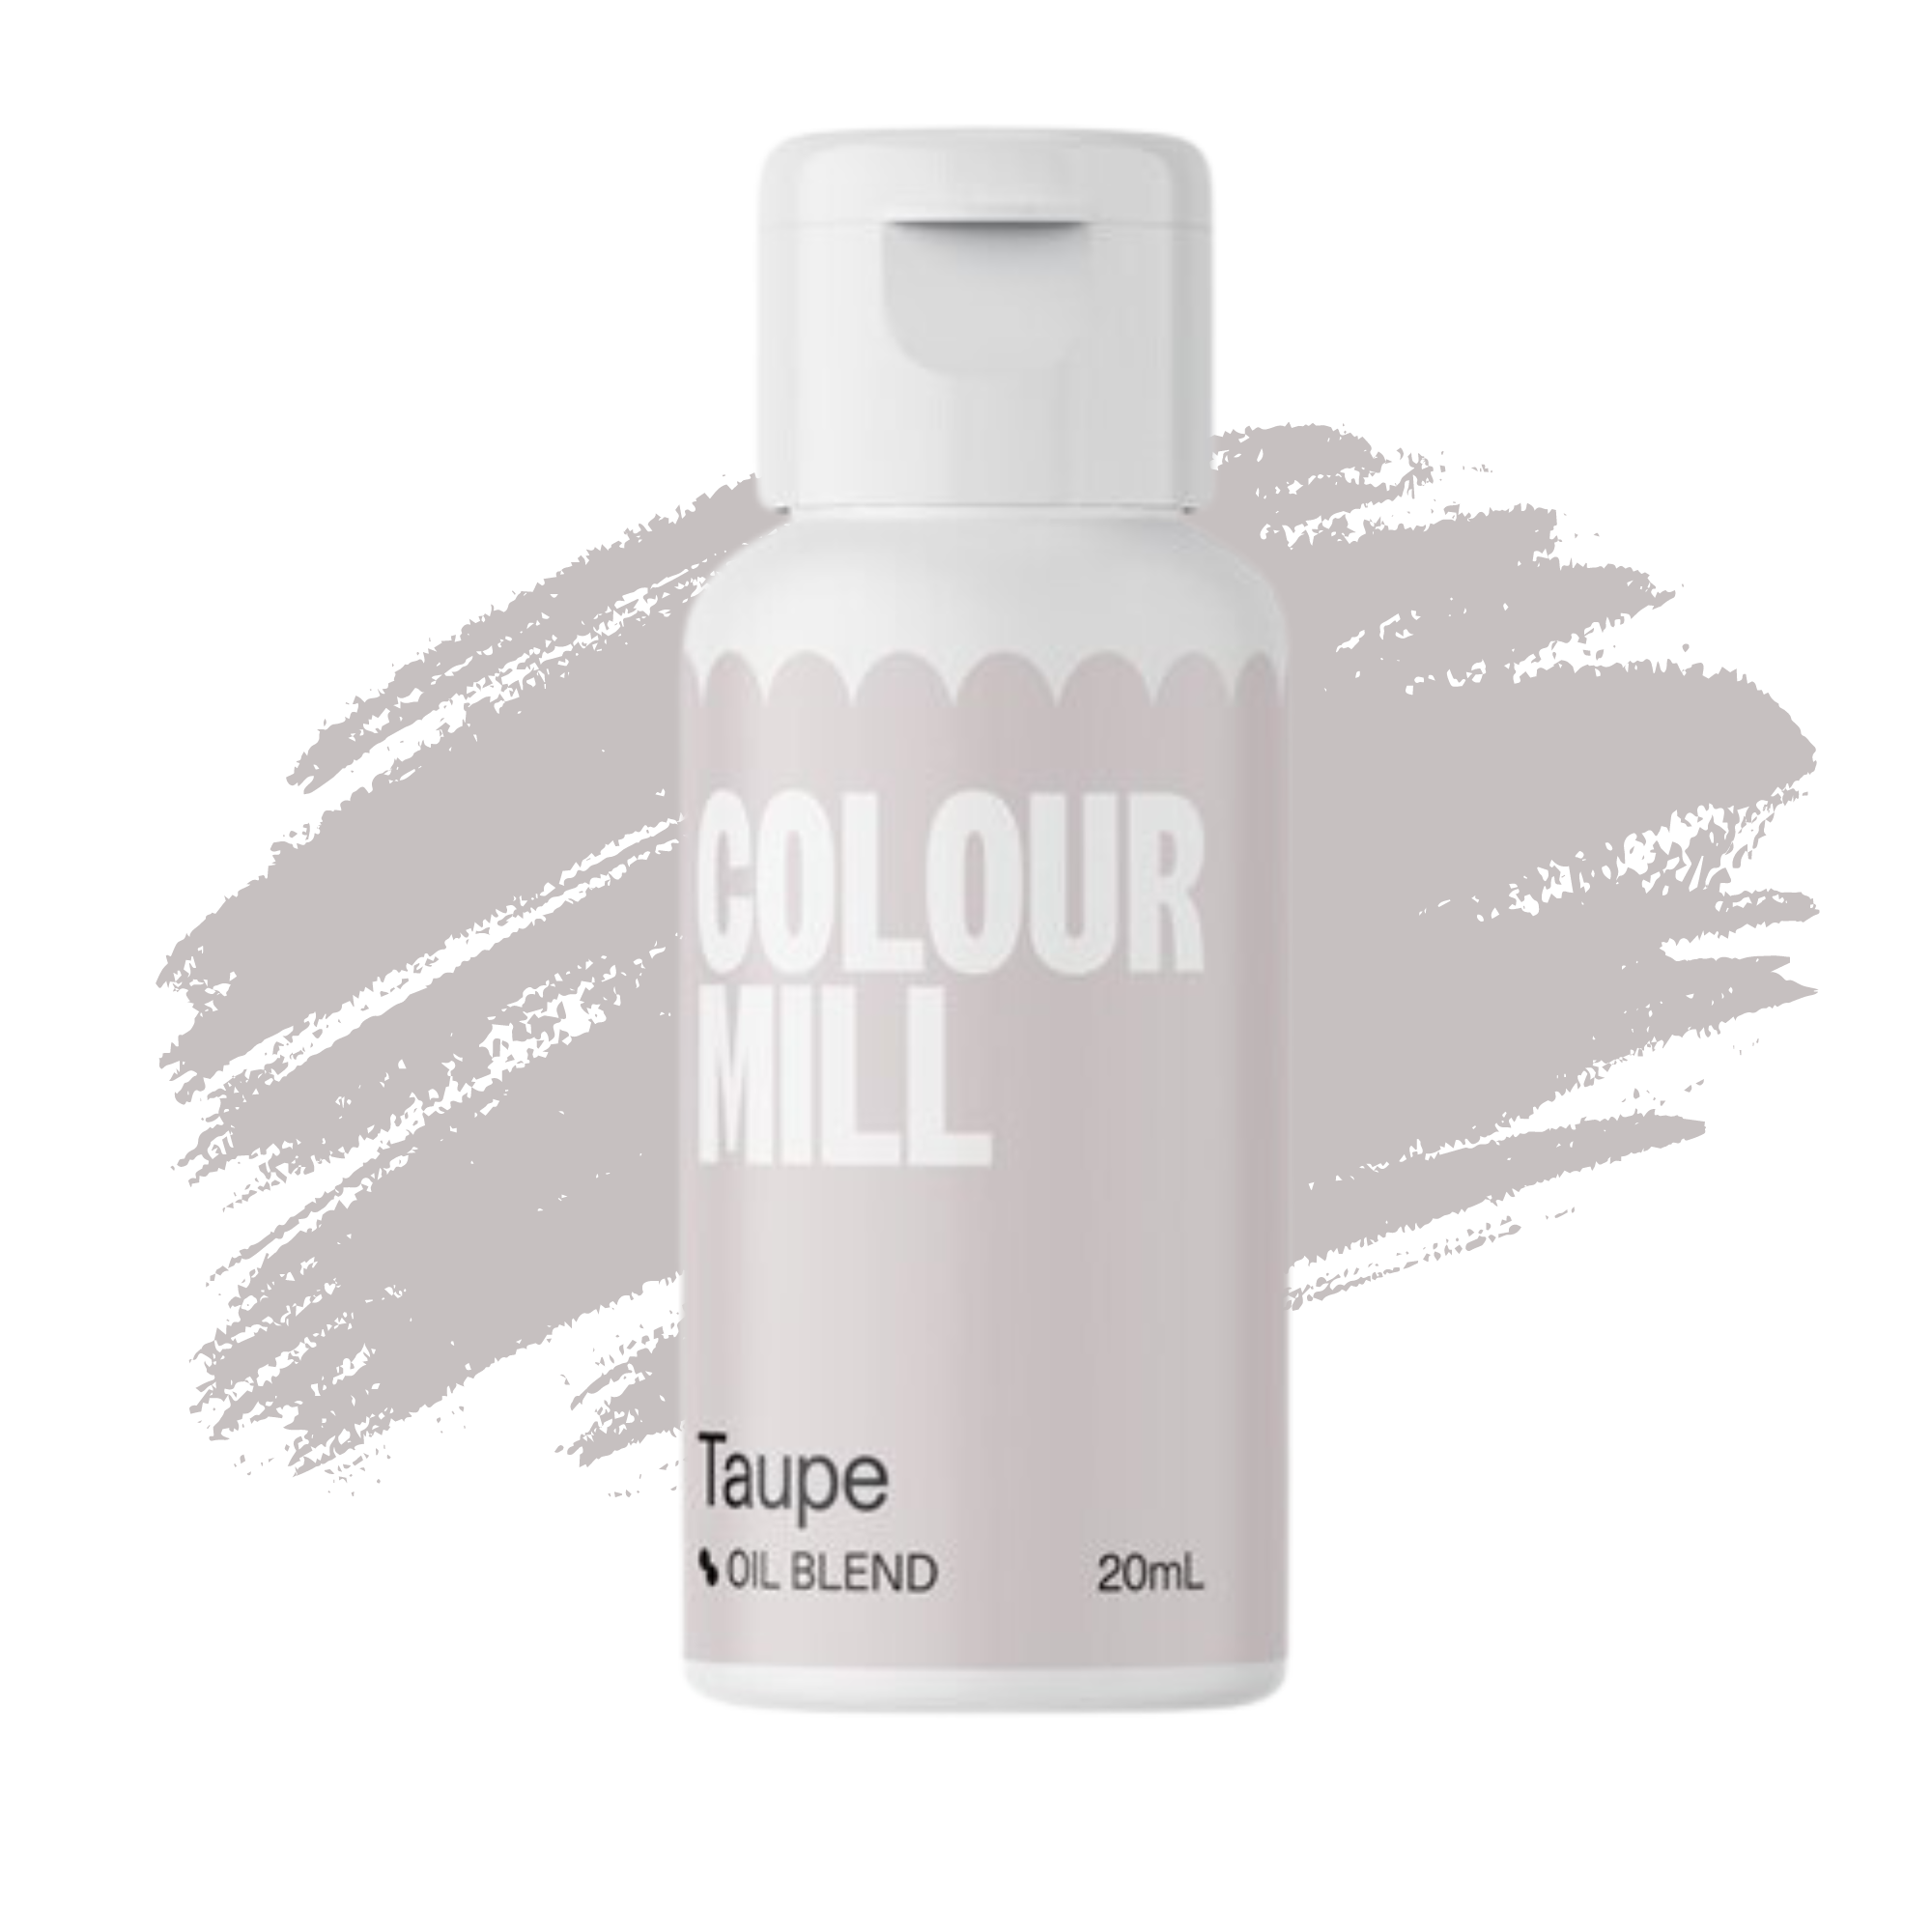 Colour Mill Taupe Food Colouring